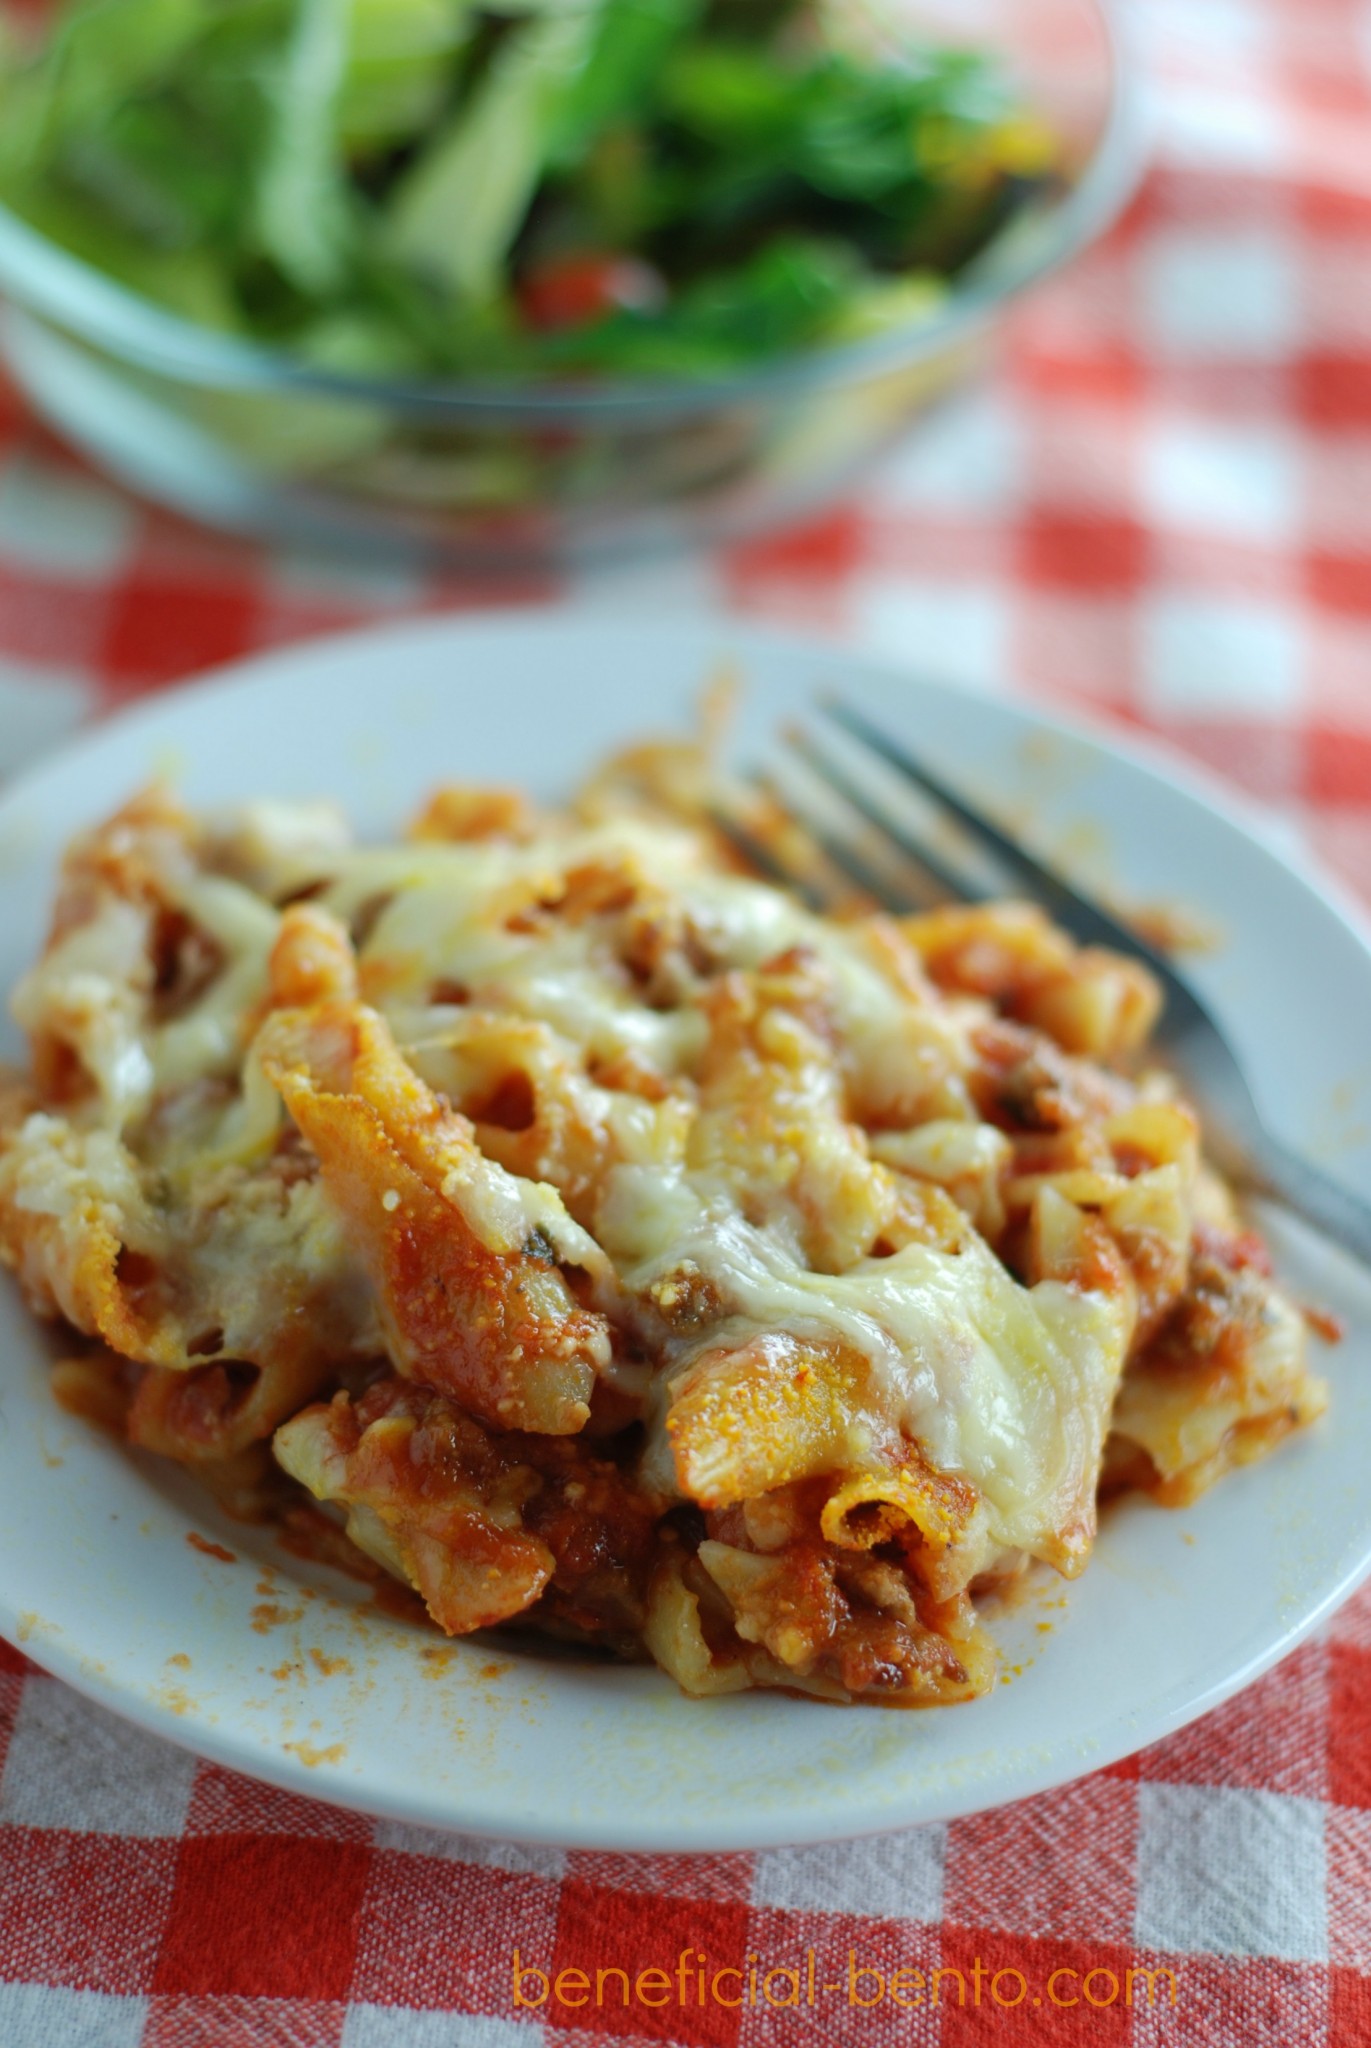 What is a good recipe for baked ziti casserole?